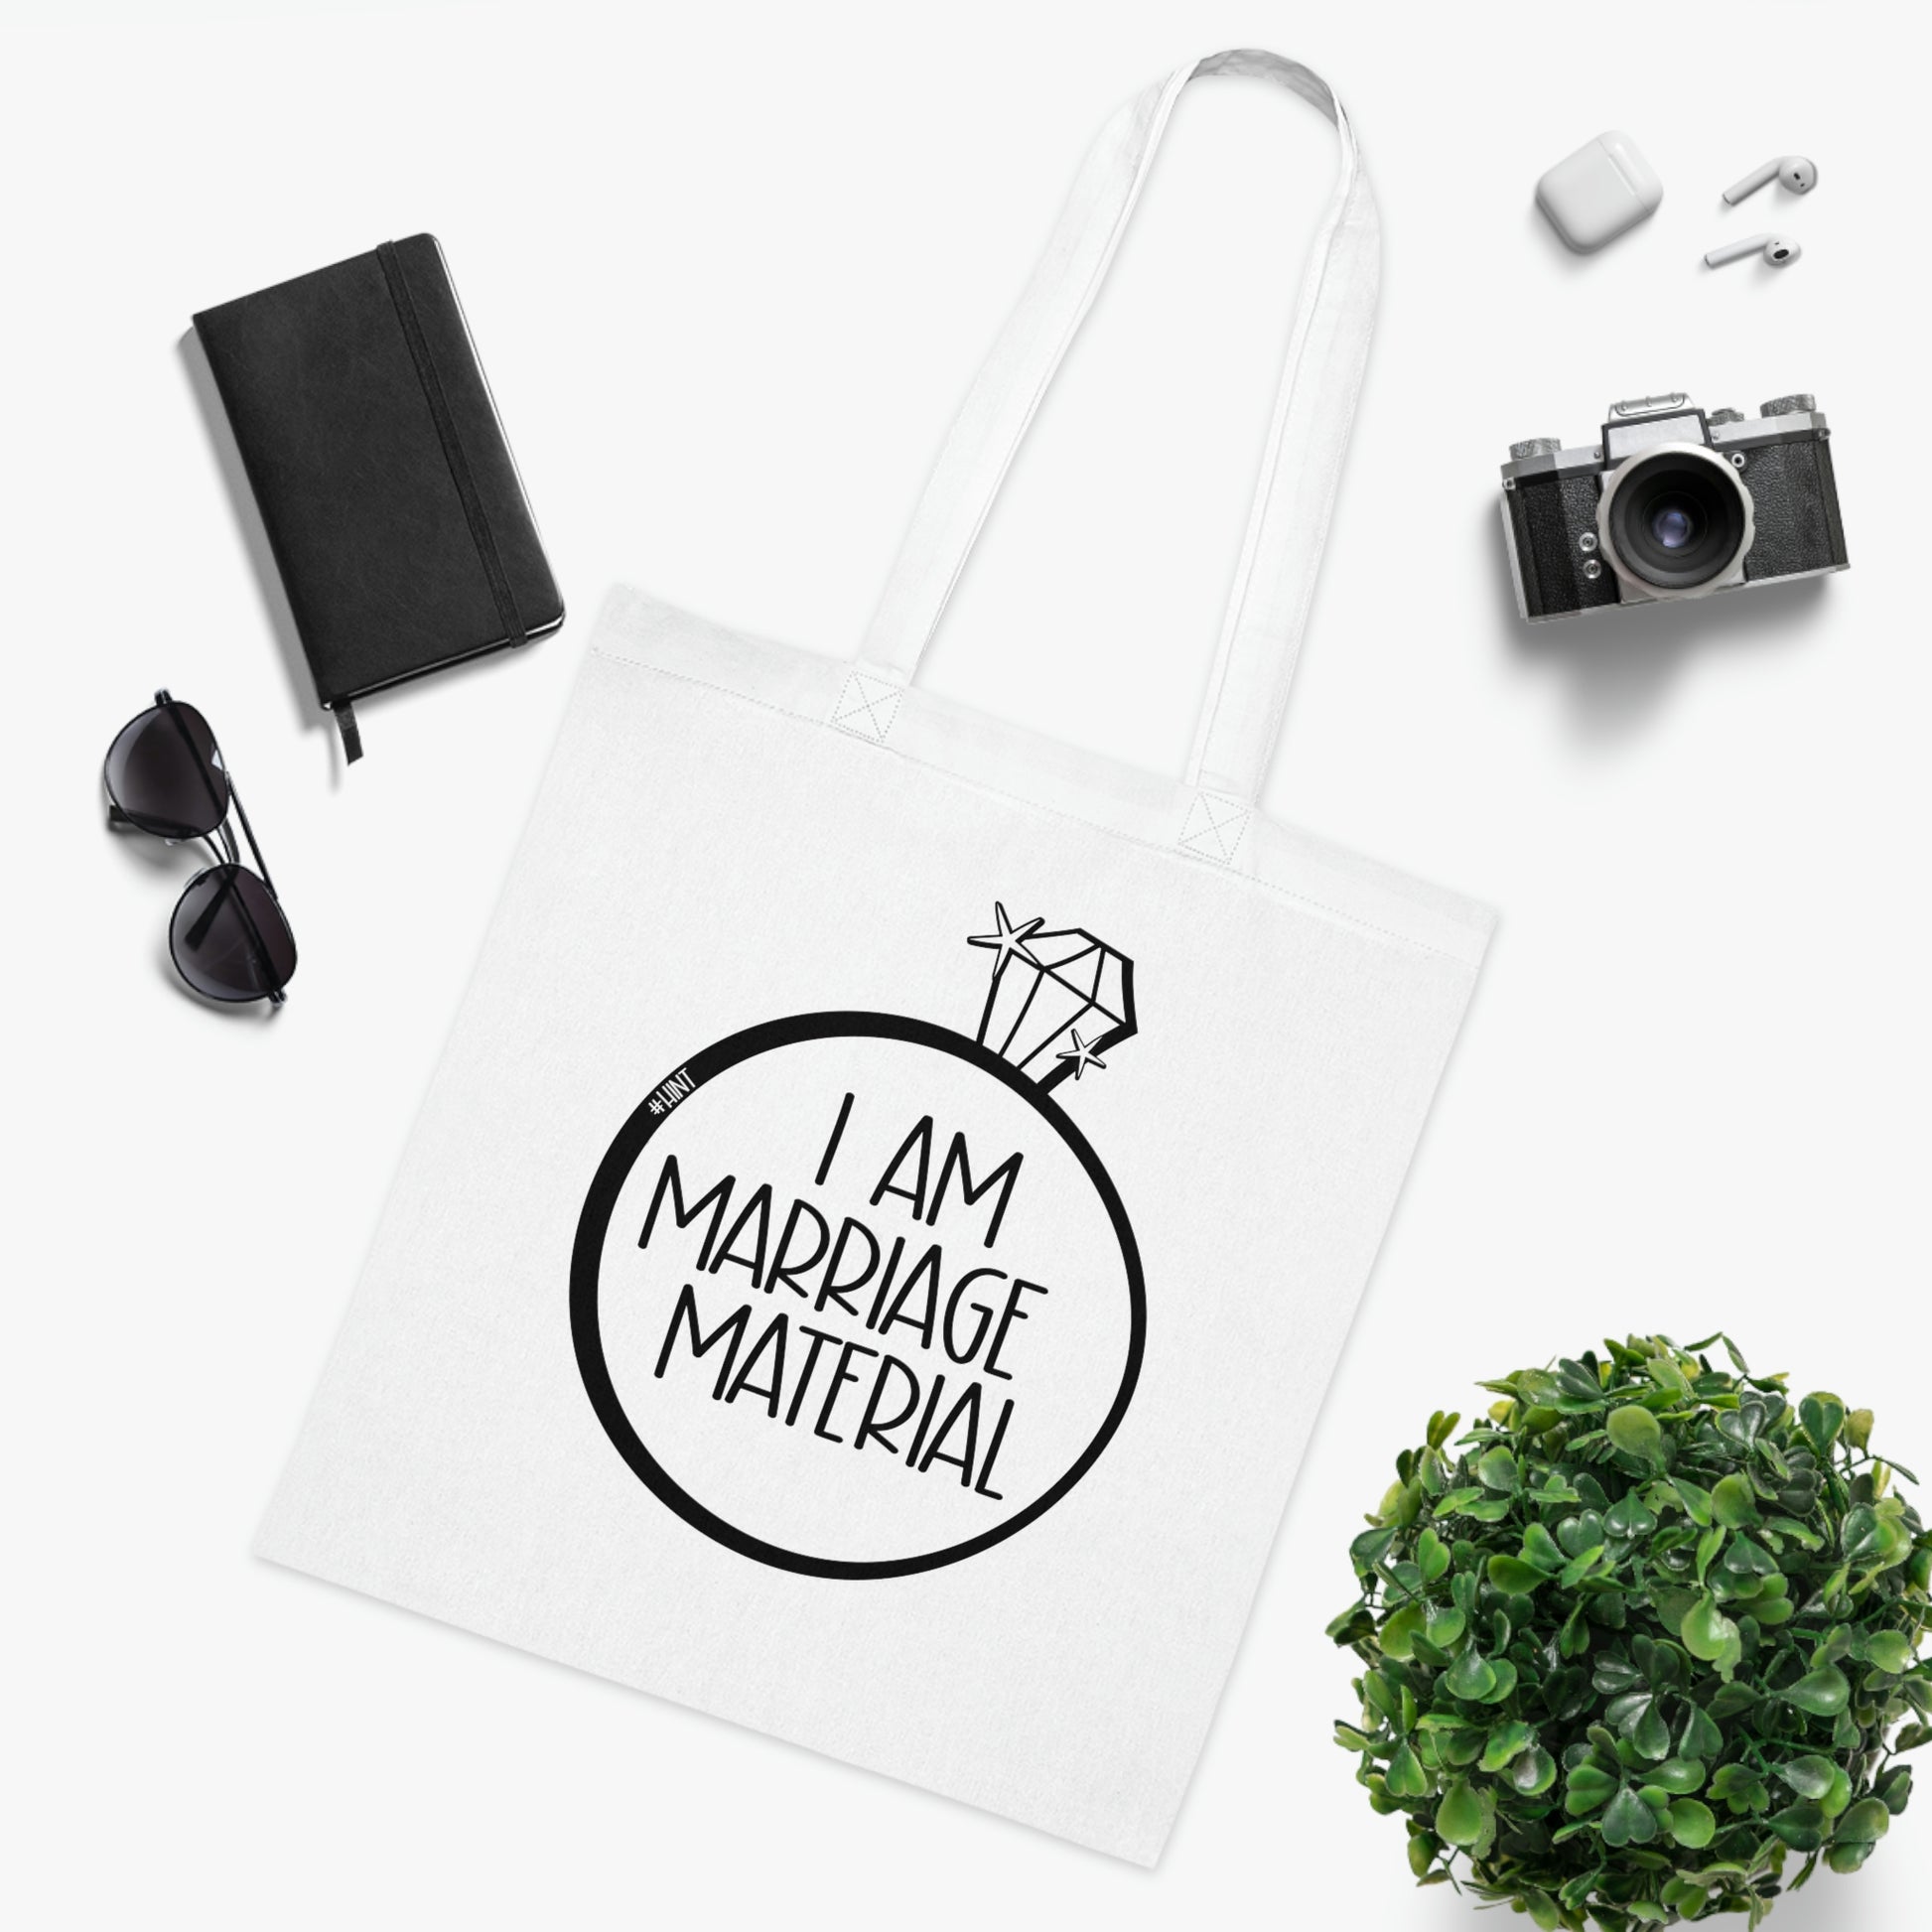 Weirdo | White cotton tote bag with funny meme for you weirdos who wanna get married: I am marriage material!